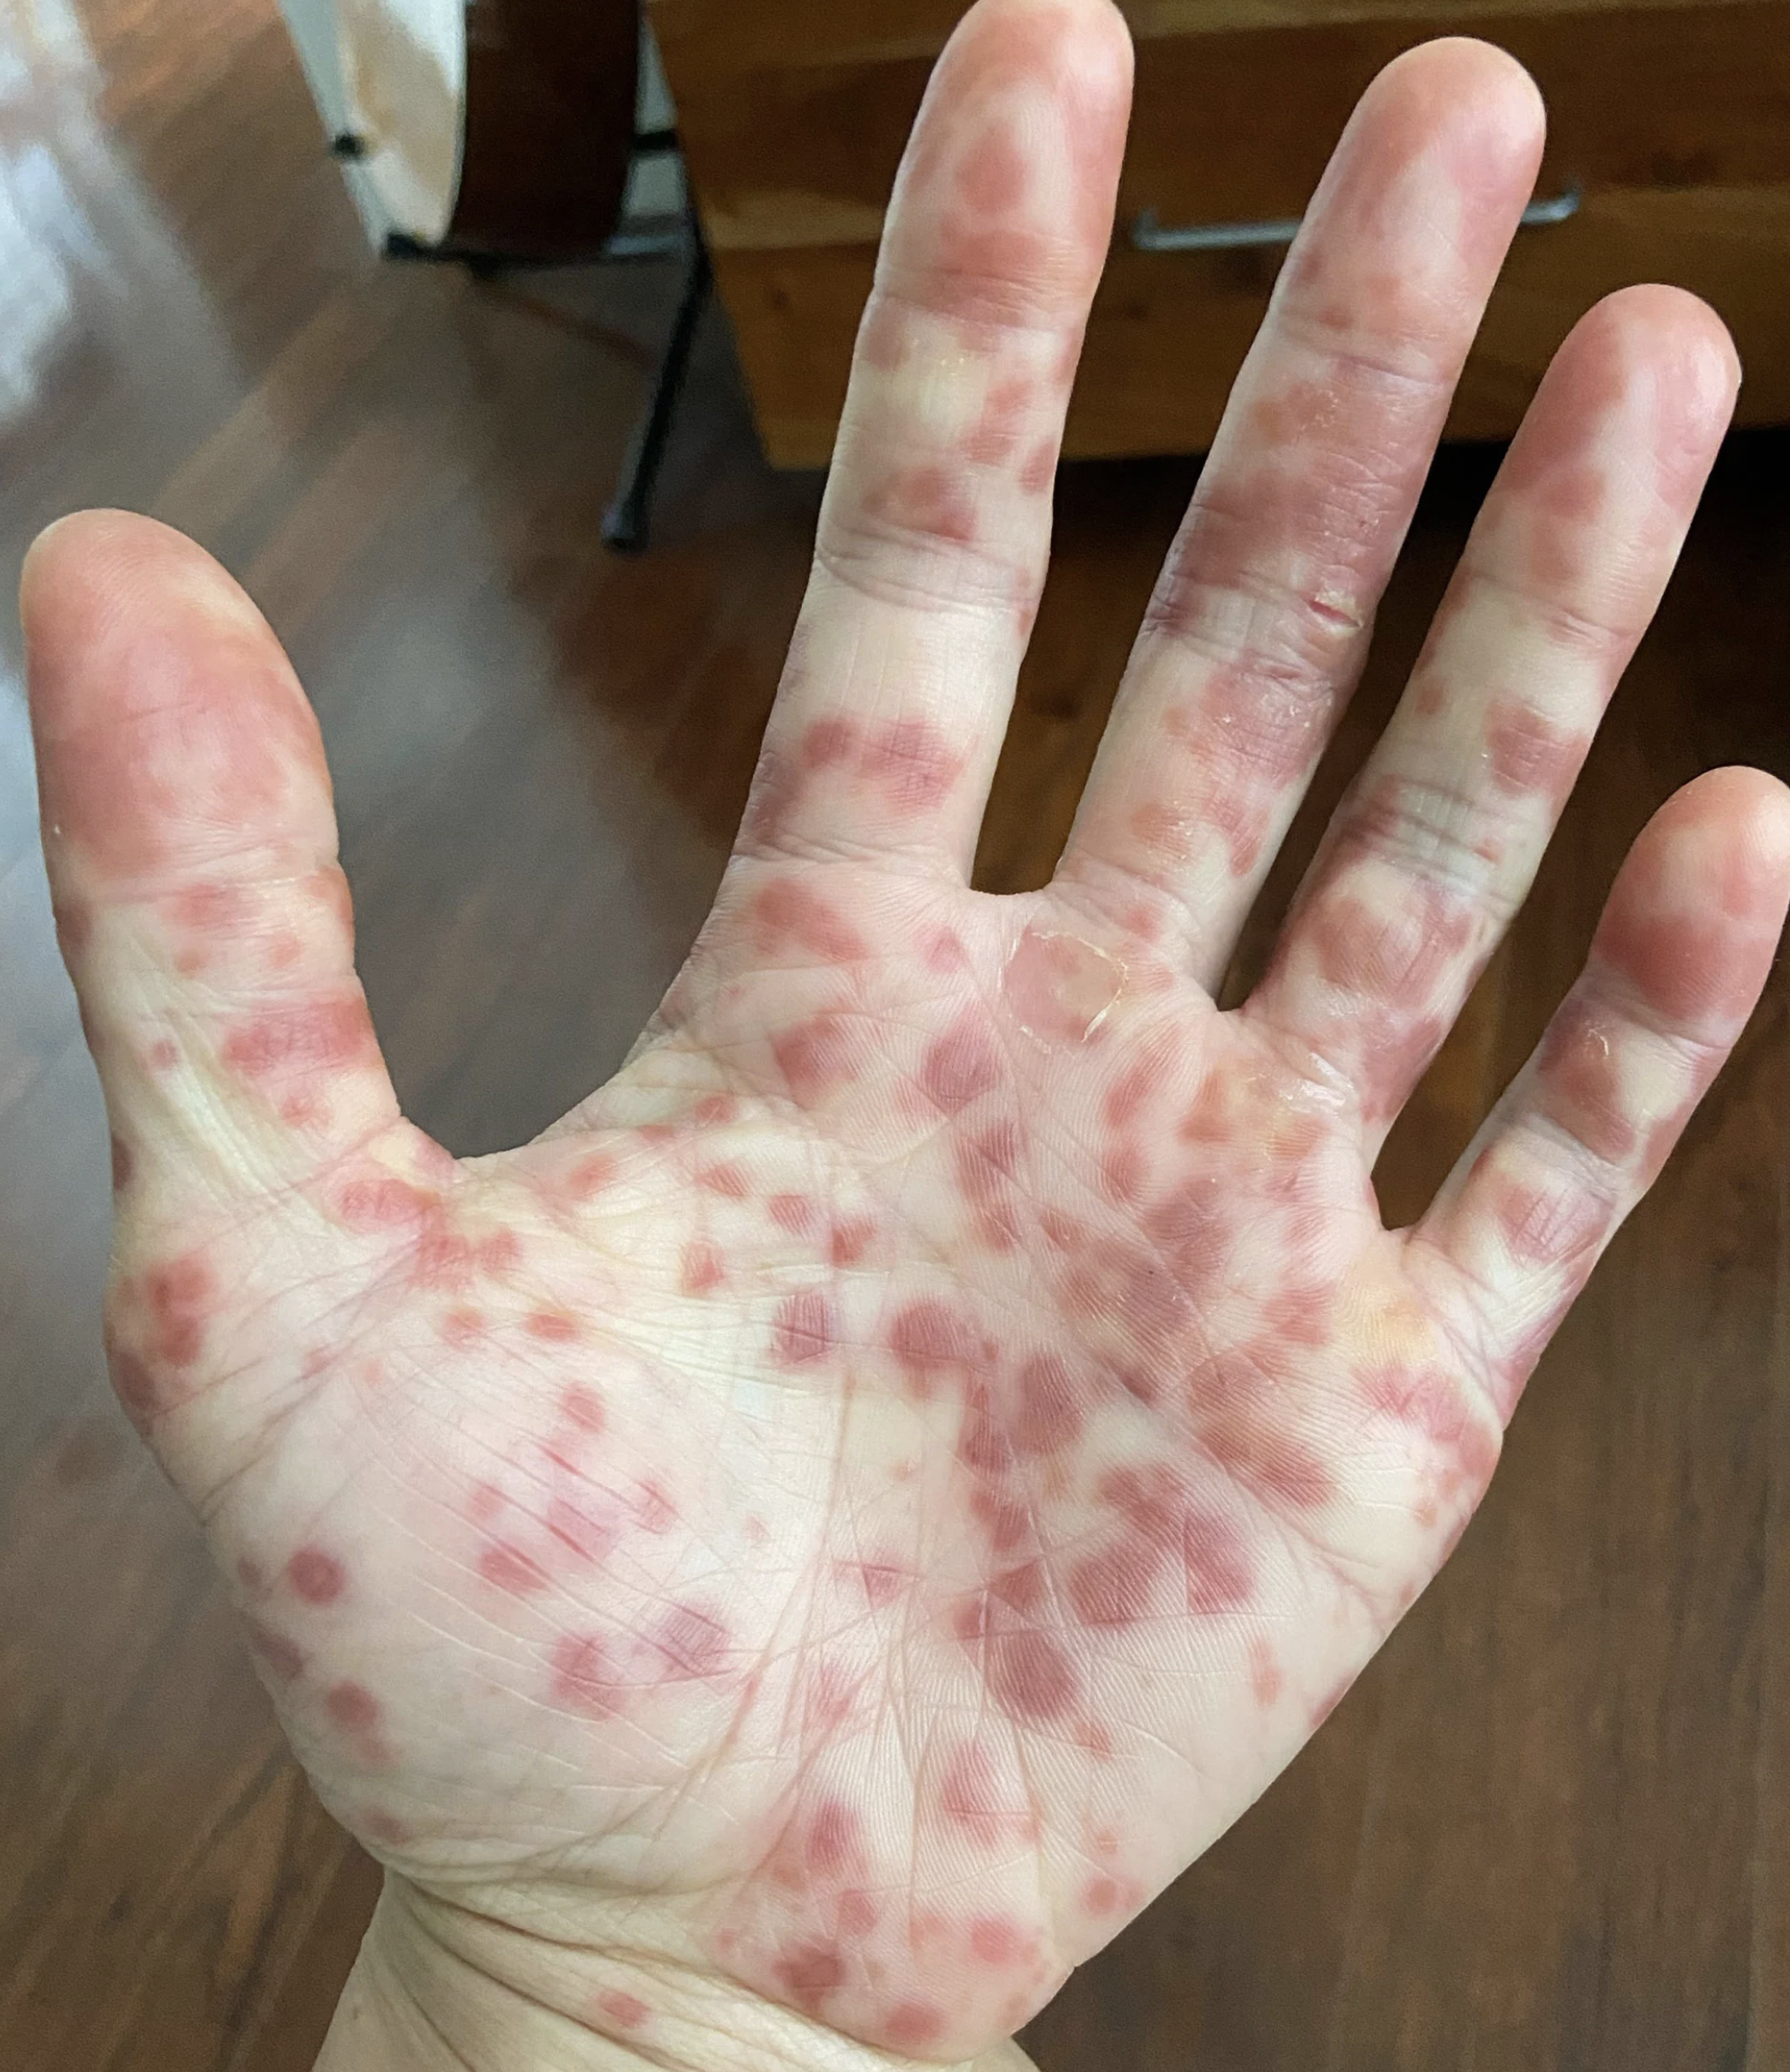 Rash on the hand of Kevin Kwong